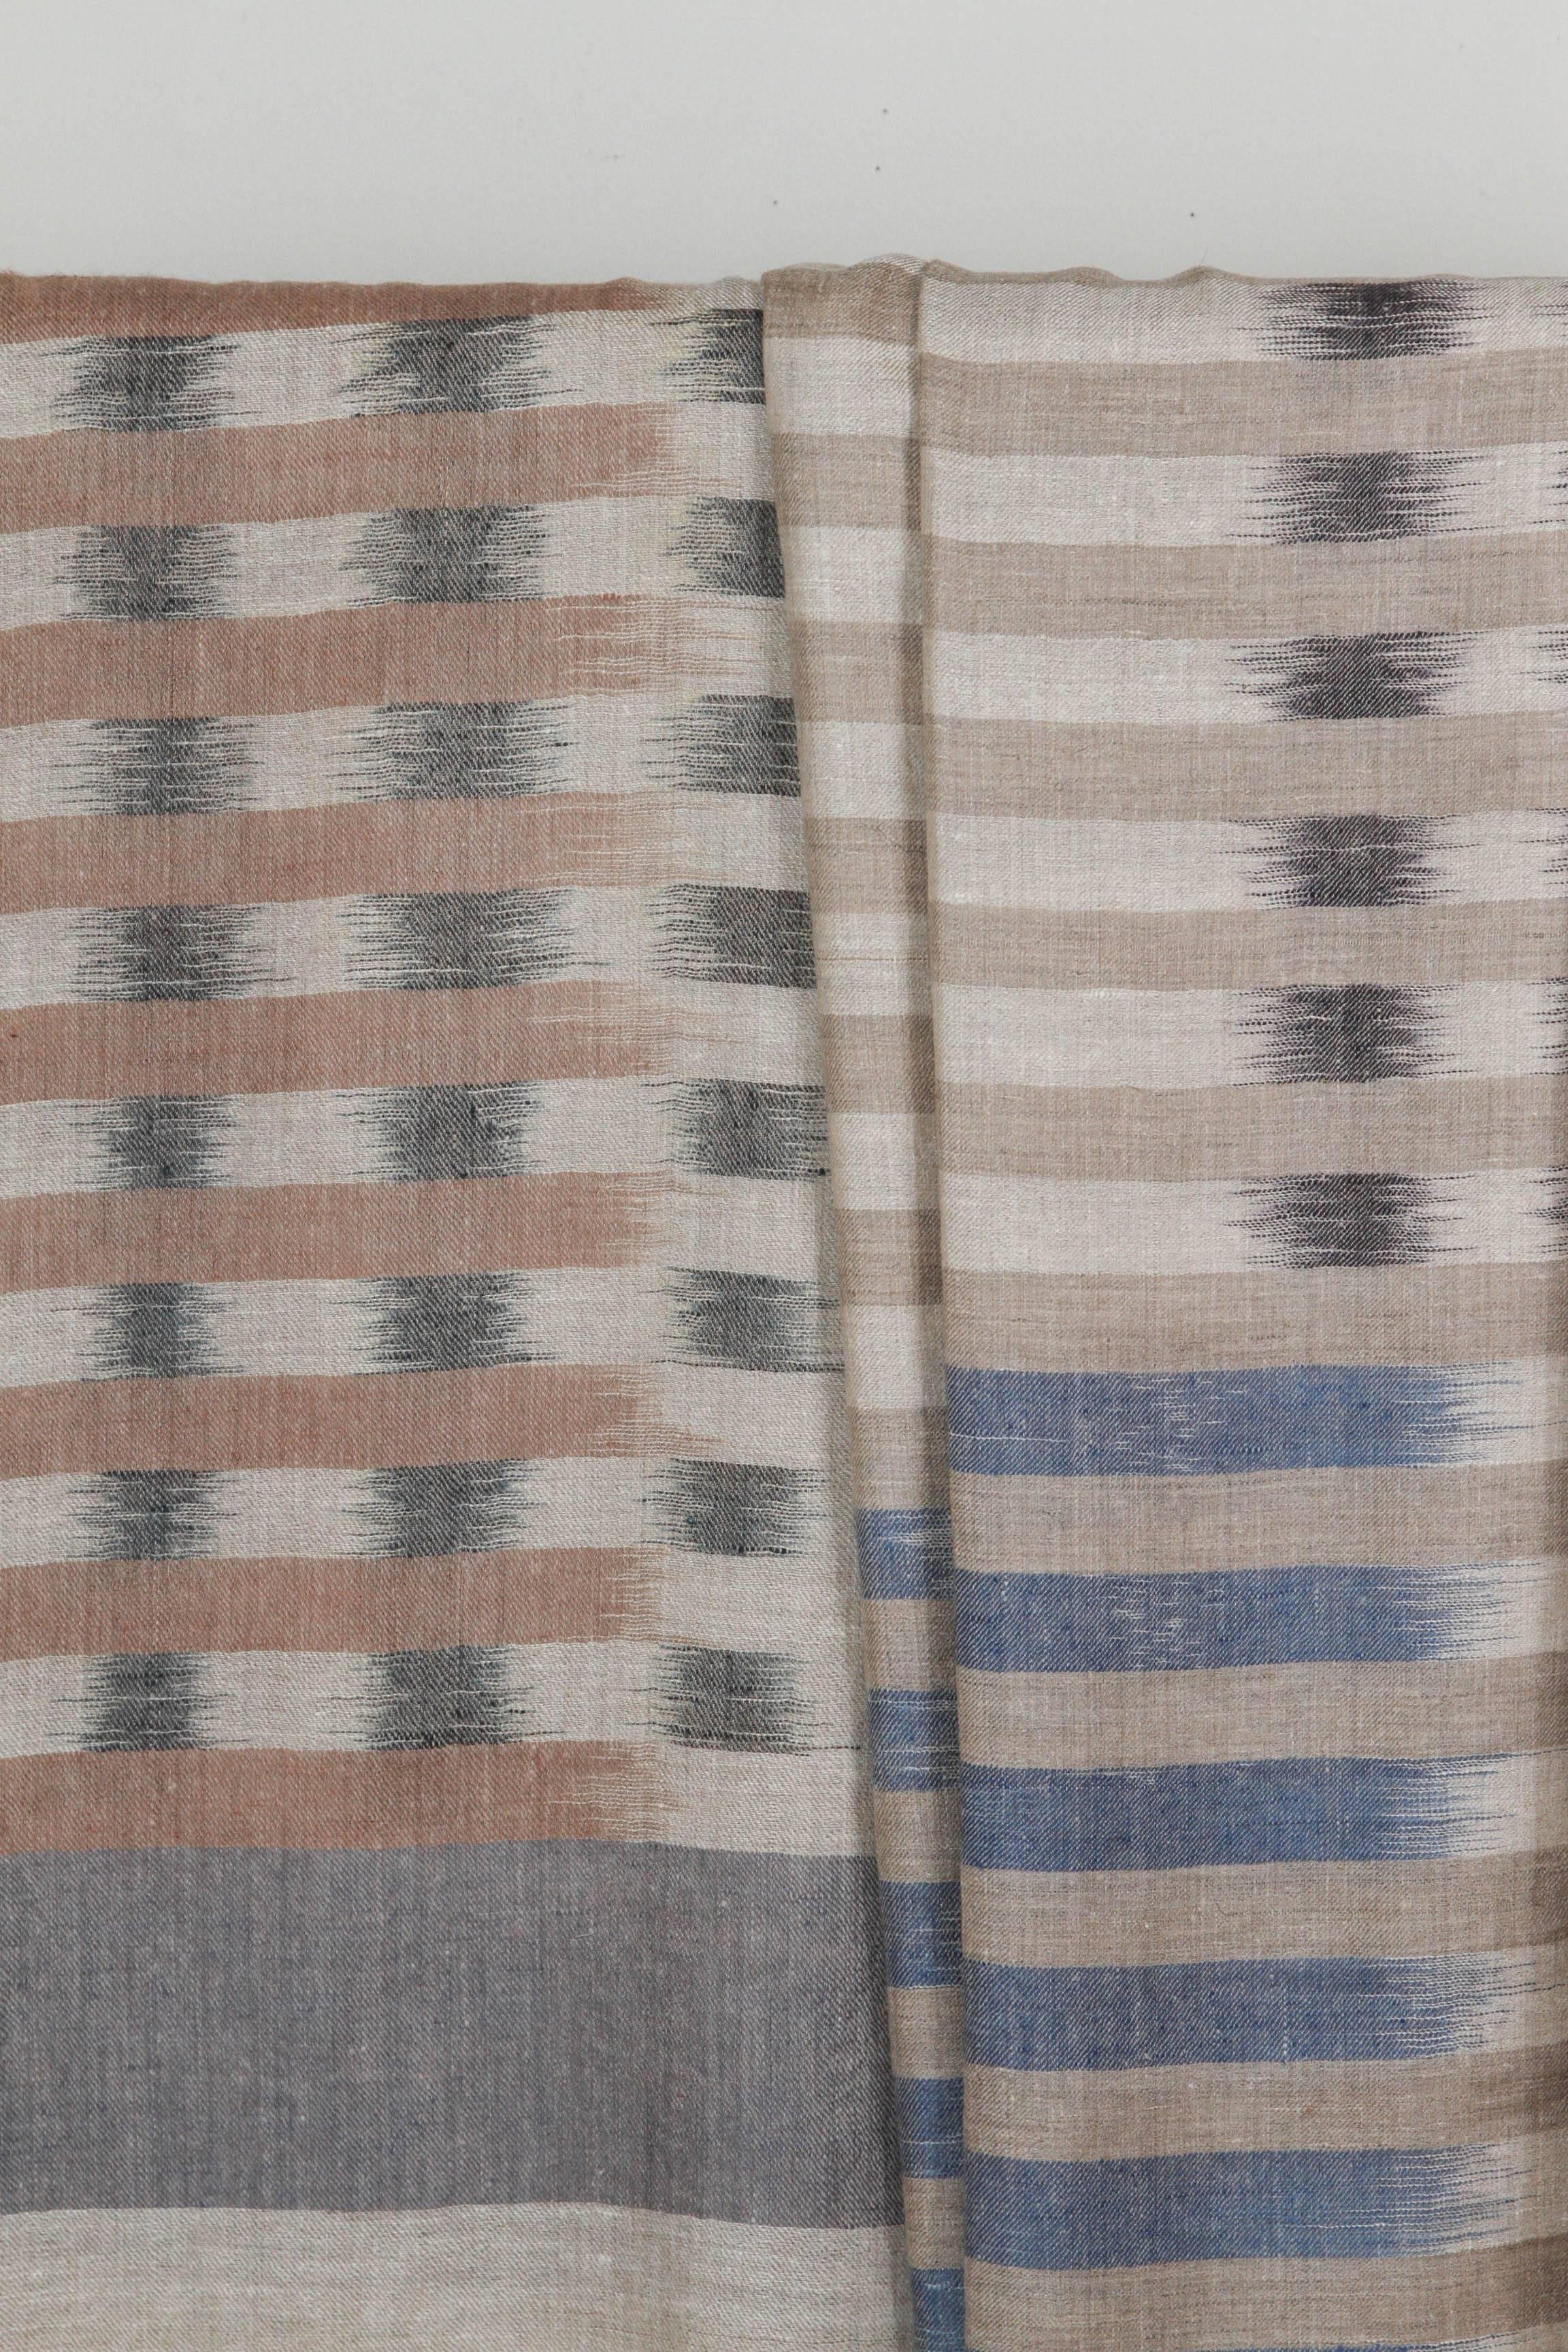 Indian Oversize Cashmere Woven Ikat Throws or Shawls For Sale